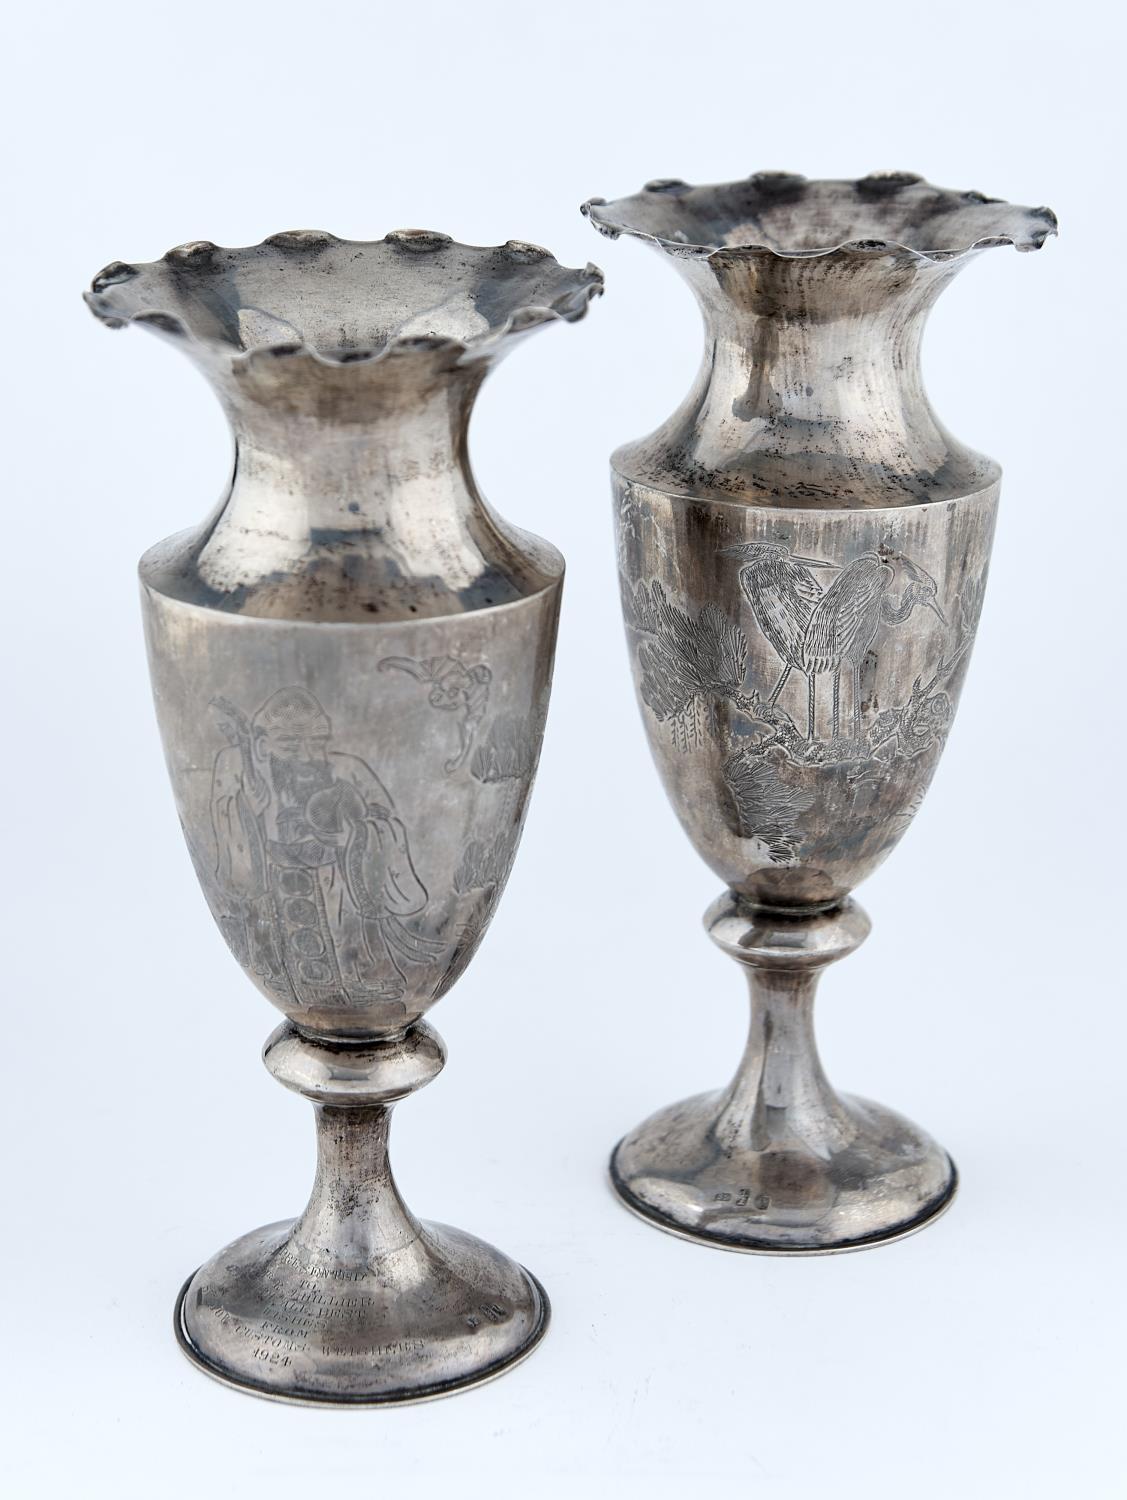 A PAIR OF CHINESE SILVER VASES, C1900  ENGRAVED ON THE SHIELD SHAPED BODY WITH SHOU LAU, DEER, BAT